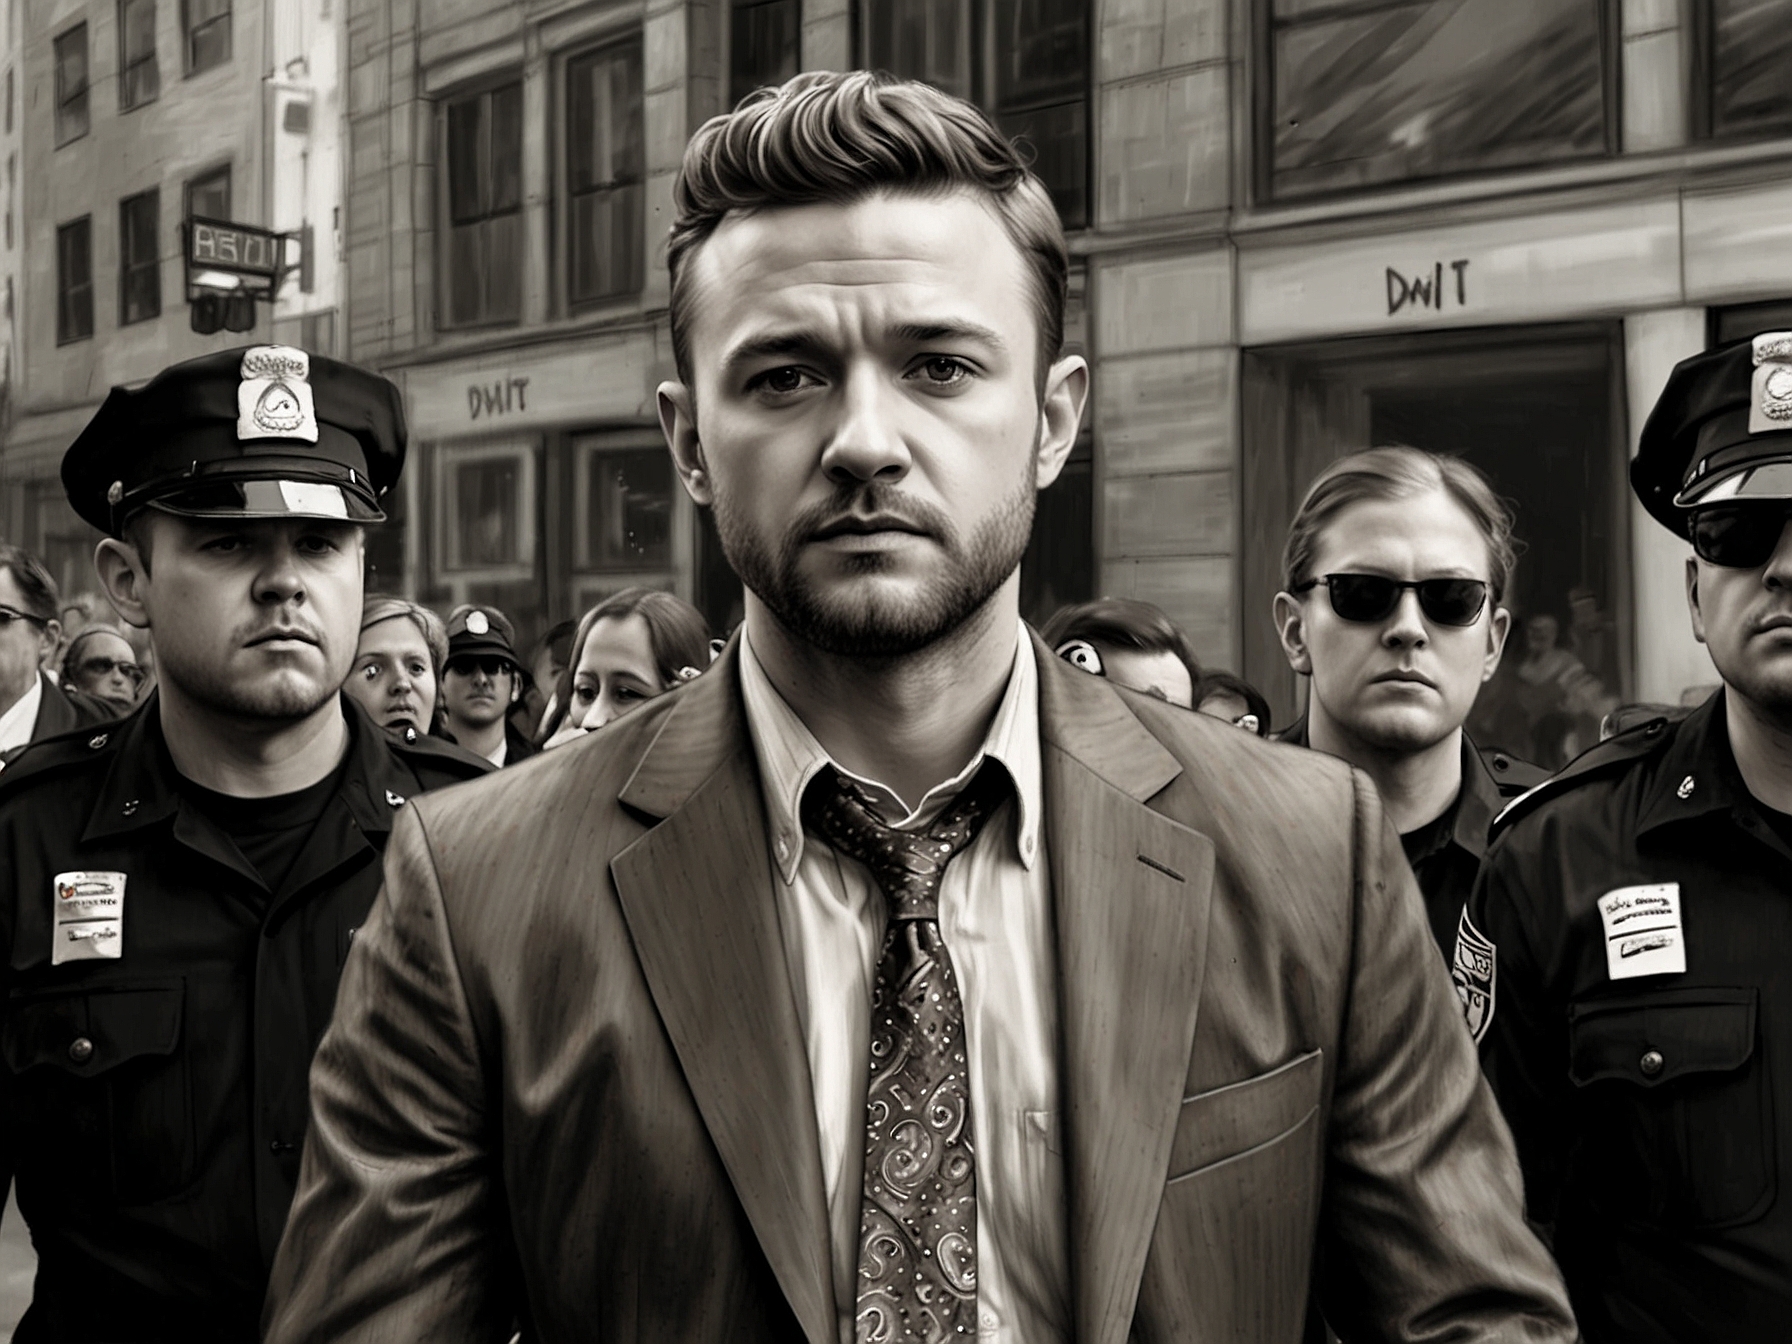 Justin Timberlake being escorted by police officers after his alleged DWI arrest, amidst flashing paparazzi cameras catching every moment of the chaotic scene.